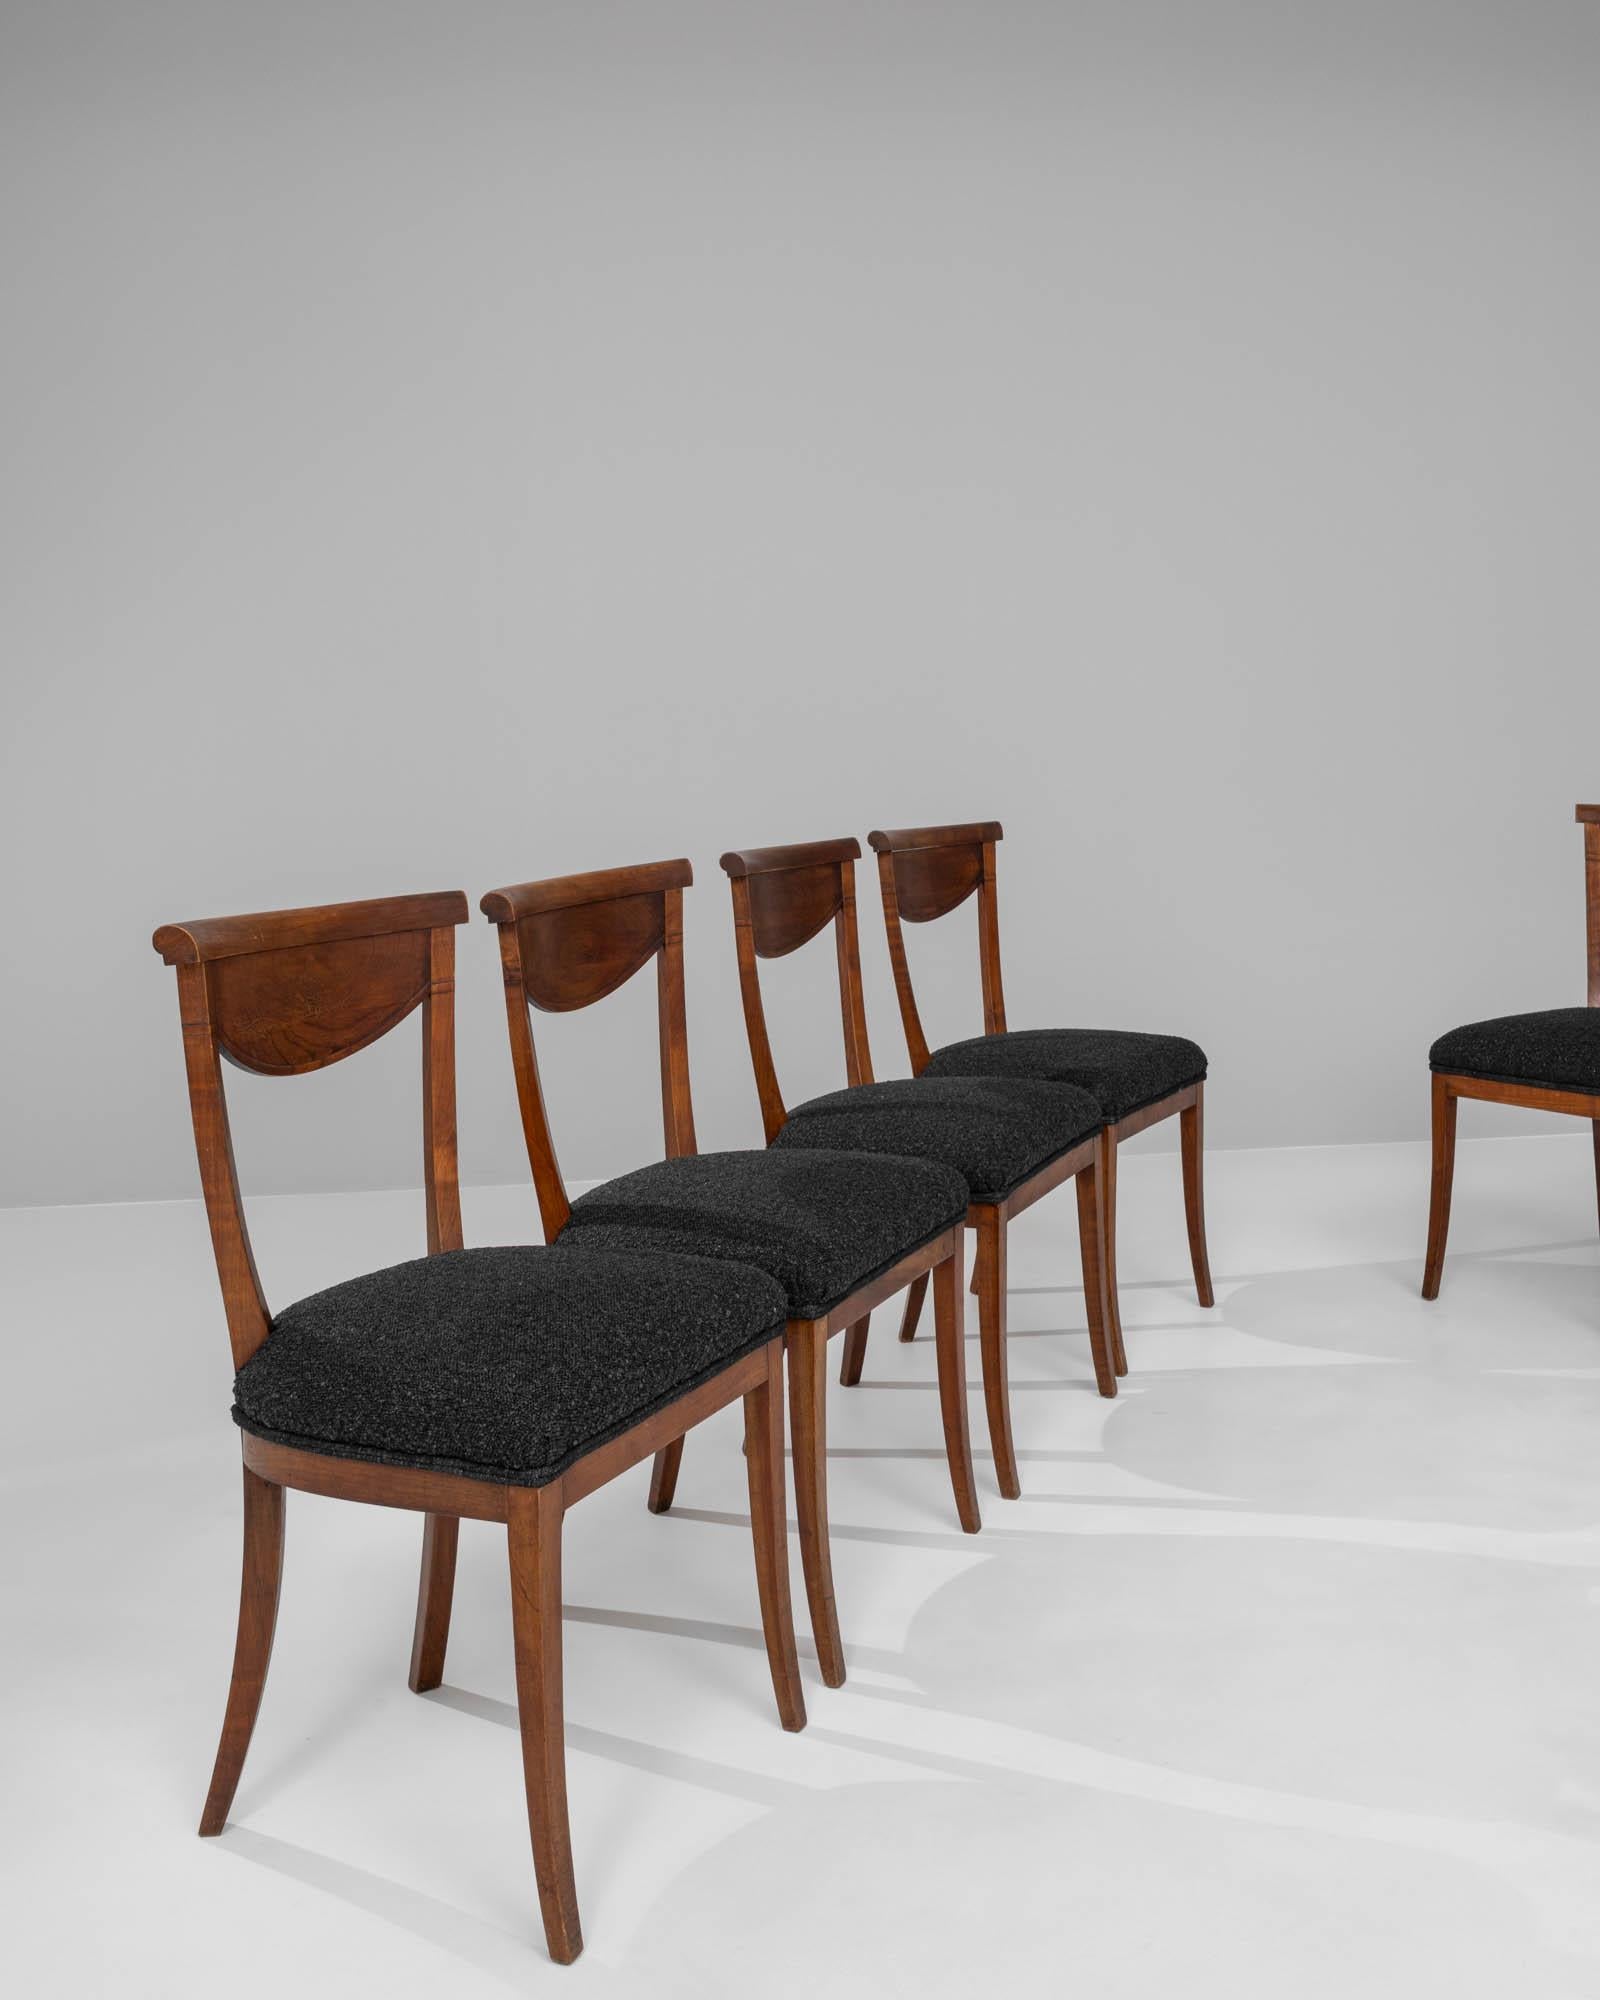 19th Century French Wooden Dining Chairs With Upholstered Seats, Set of 6 For Sale 2